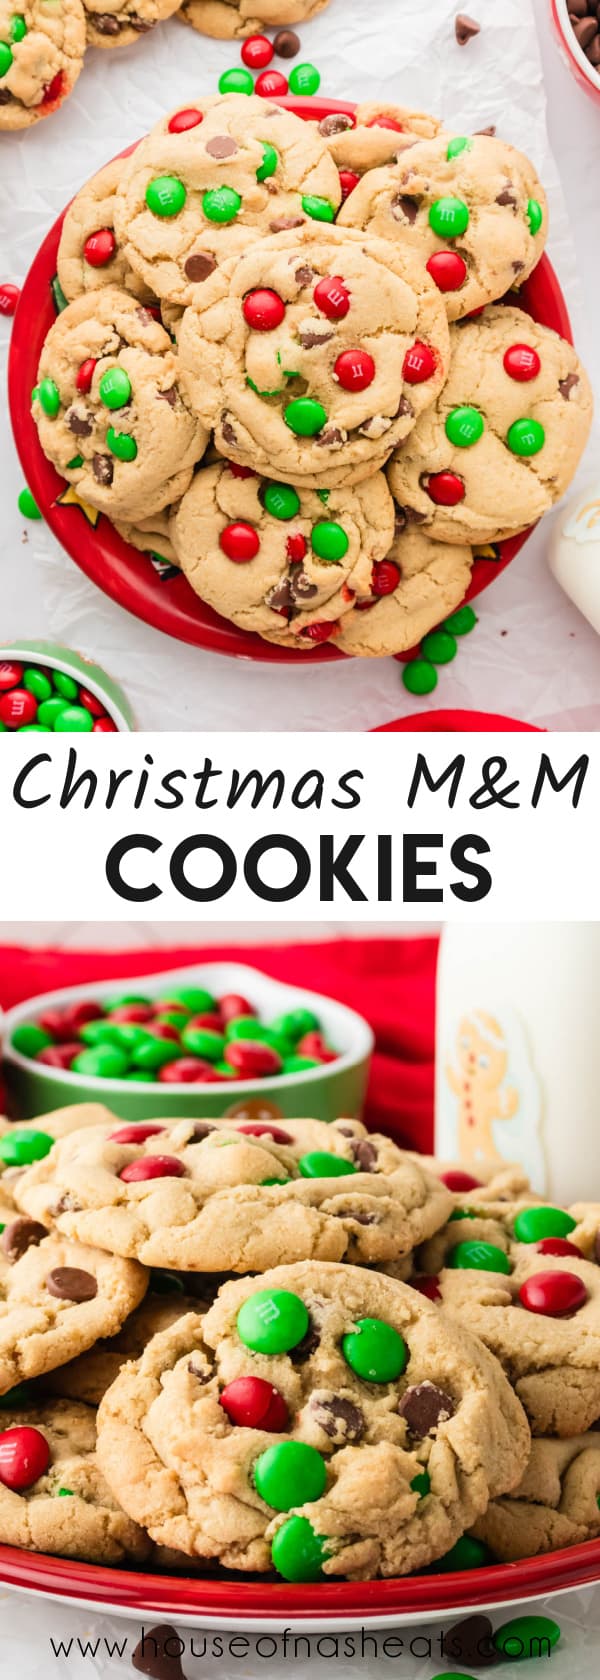 A collage of images of Christmas M&M cookies with text overlay.